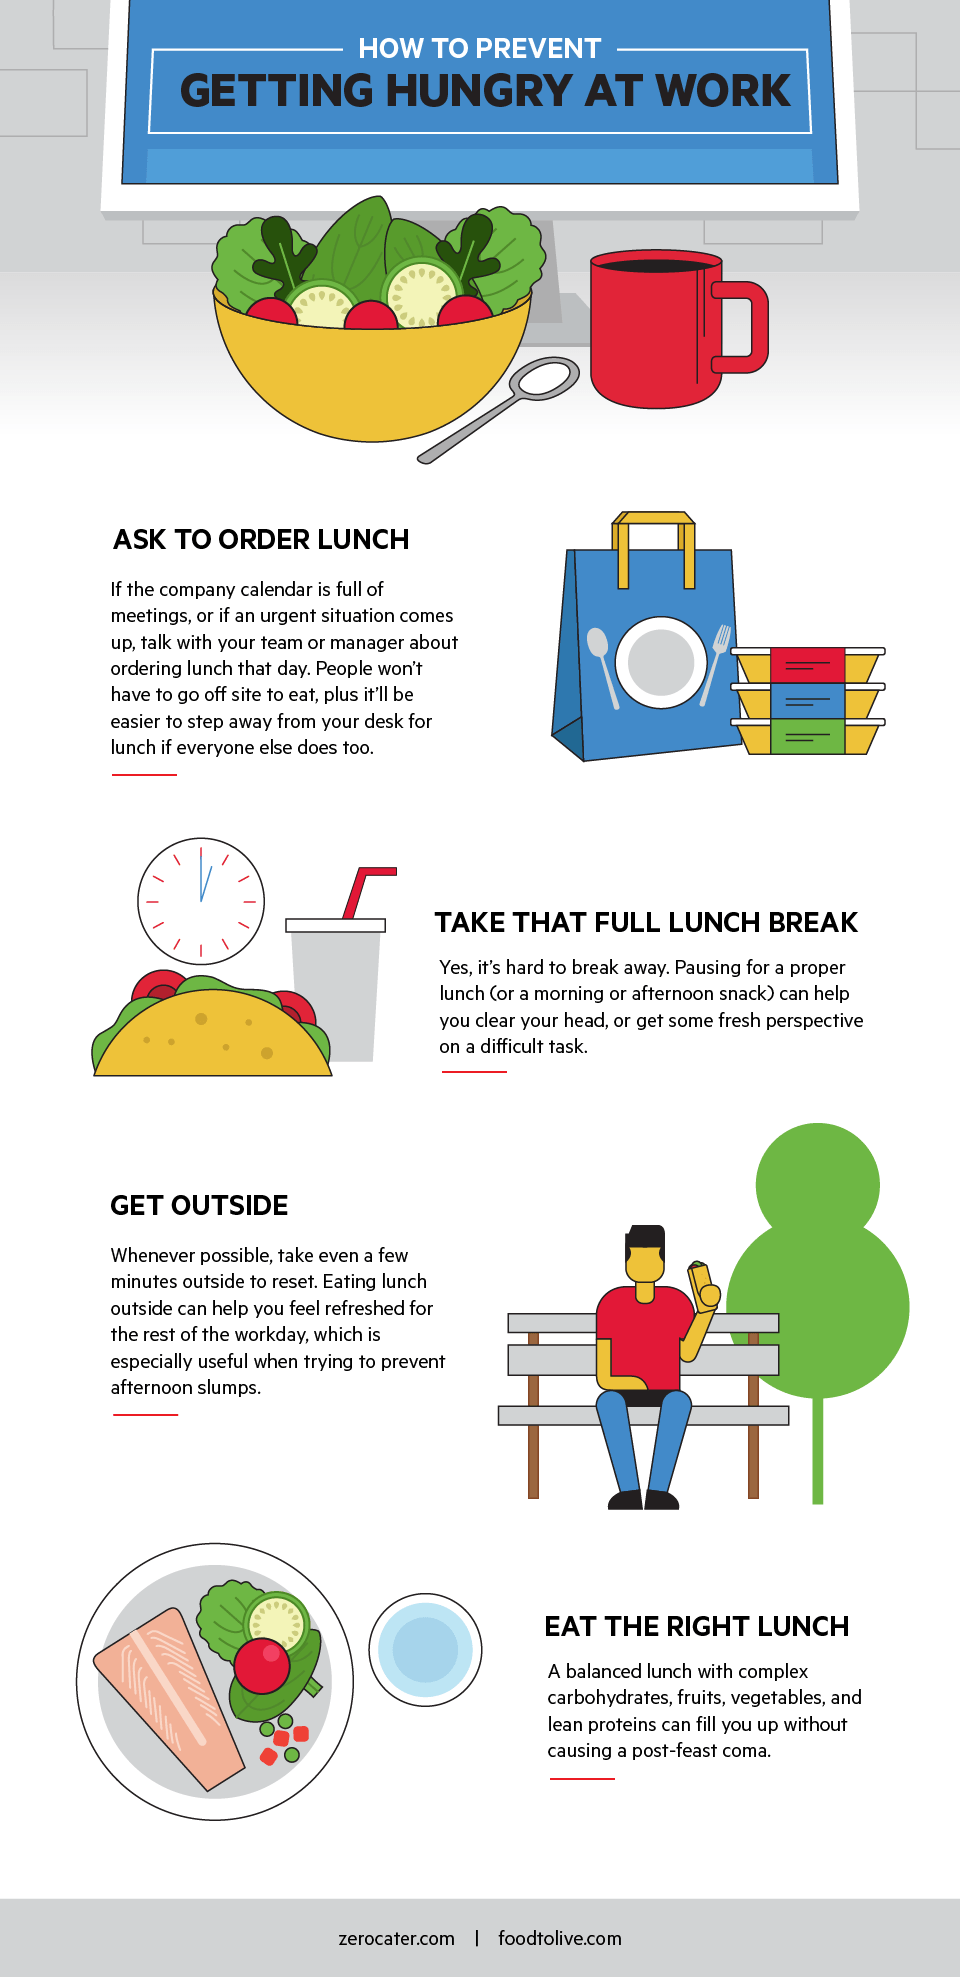 How to Prevent Getting Hungry at Work